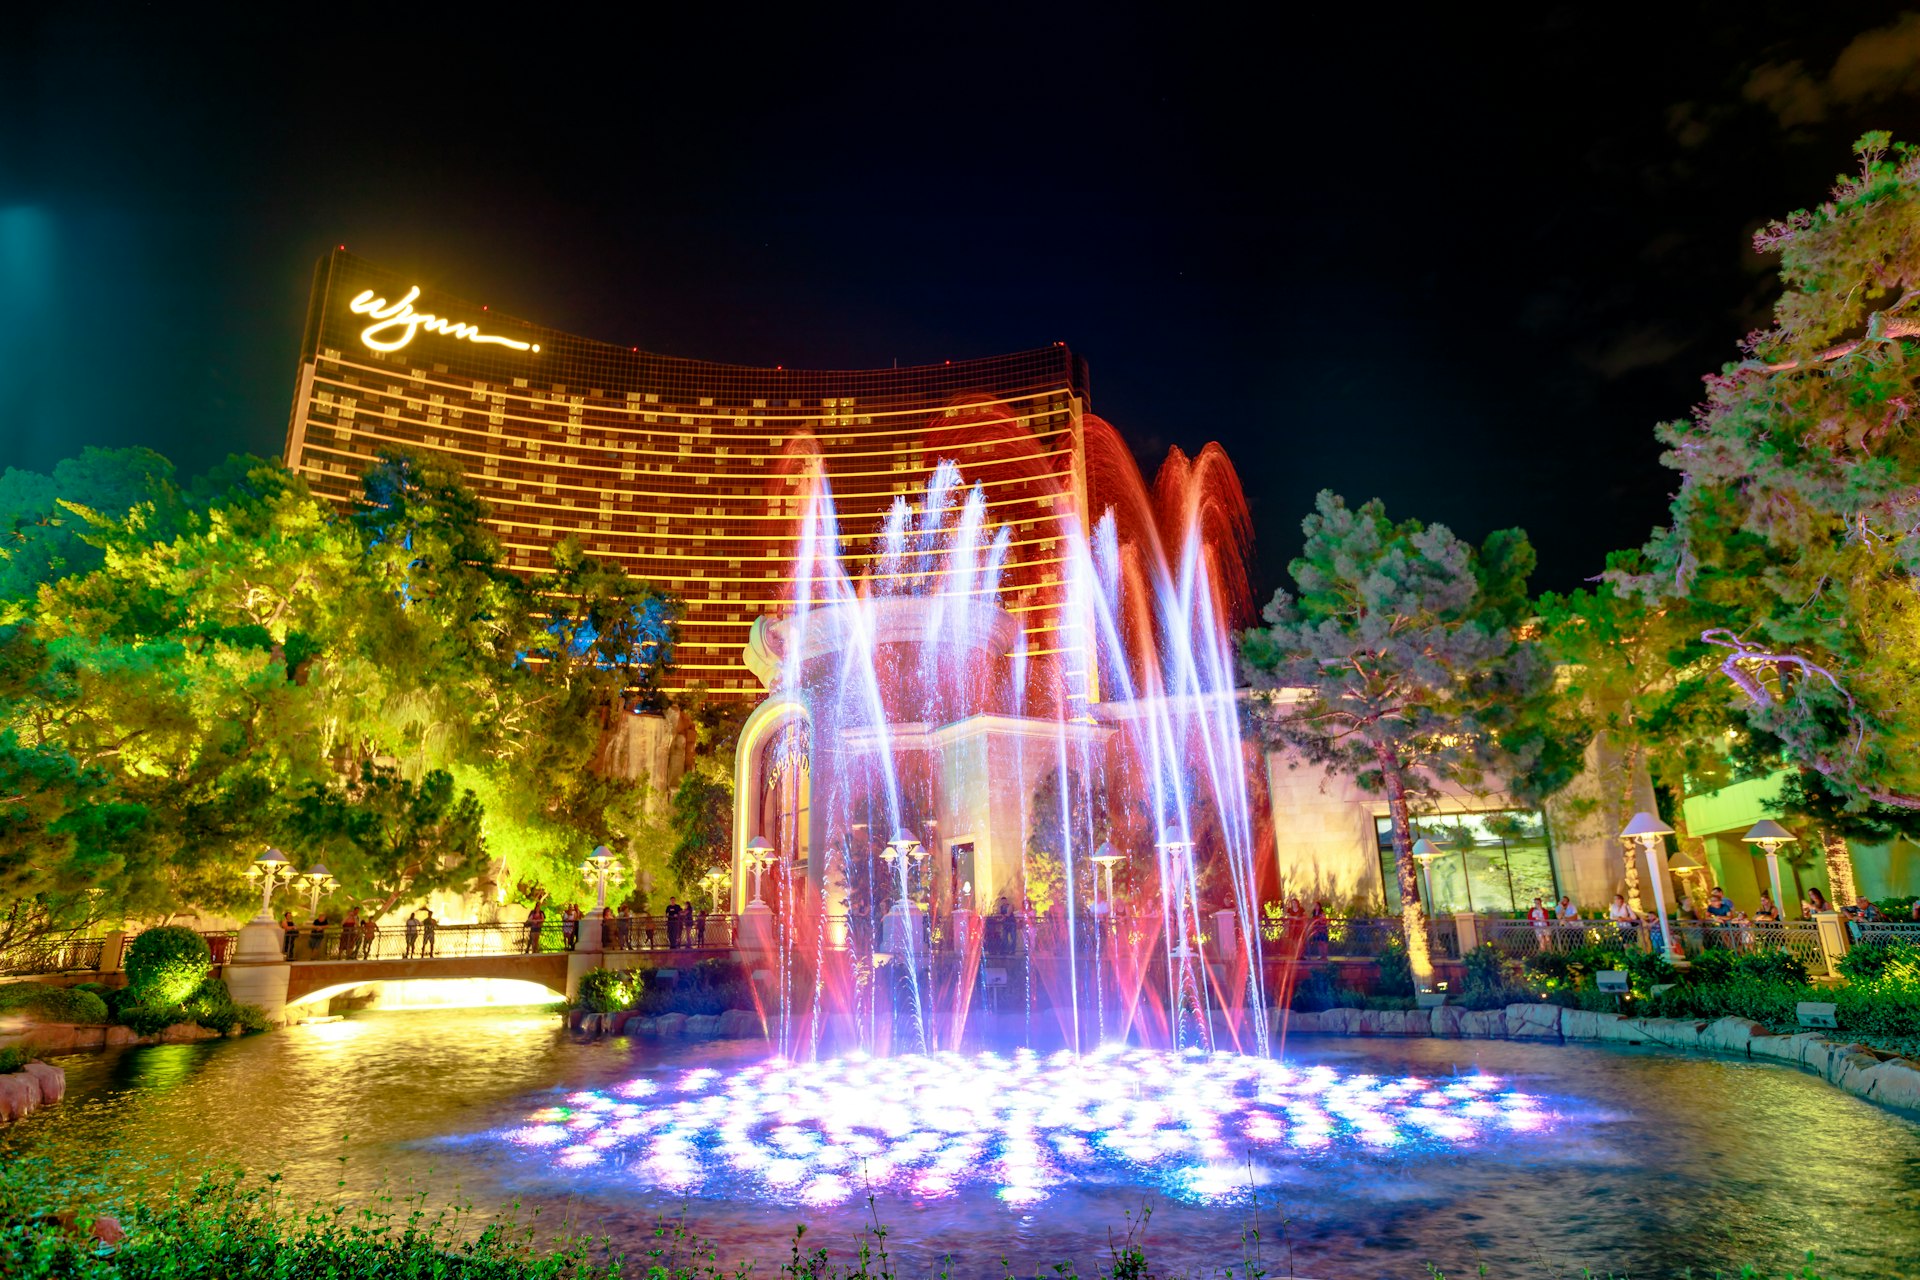 Fountains lit up at night in front of a casino